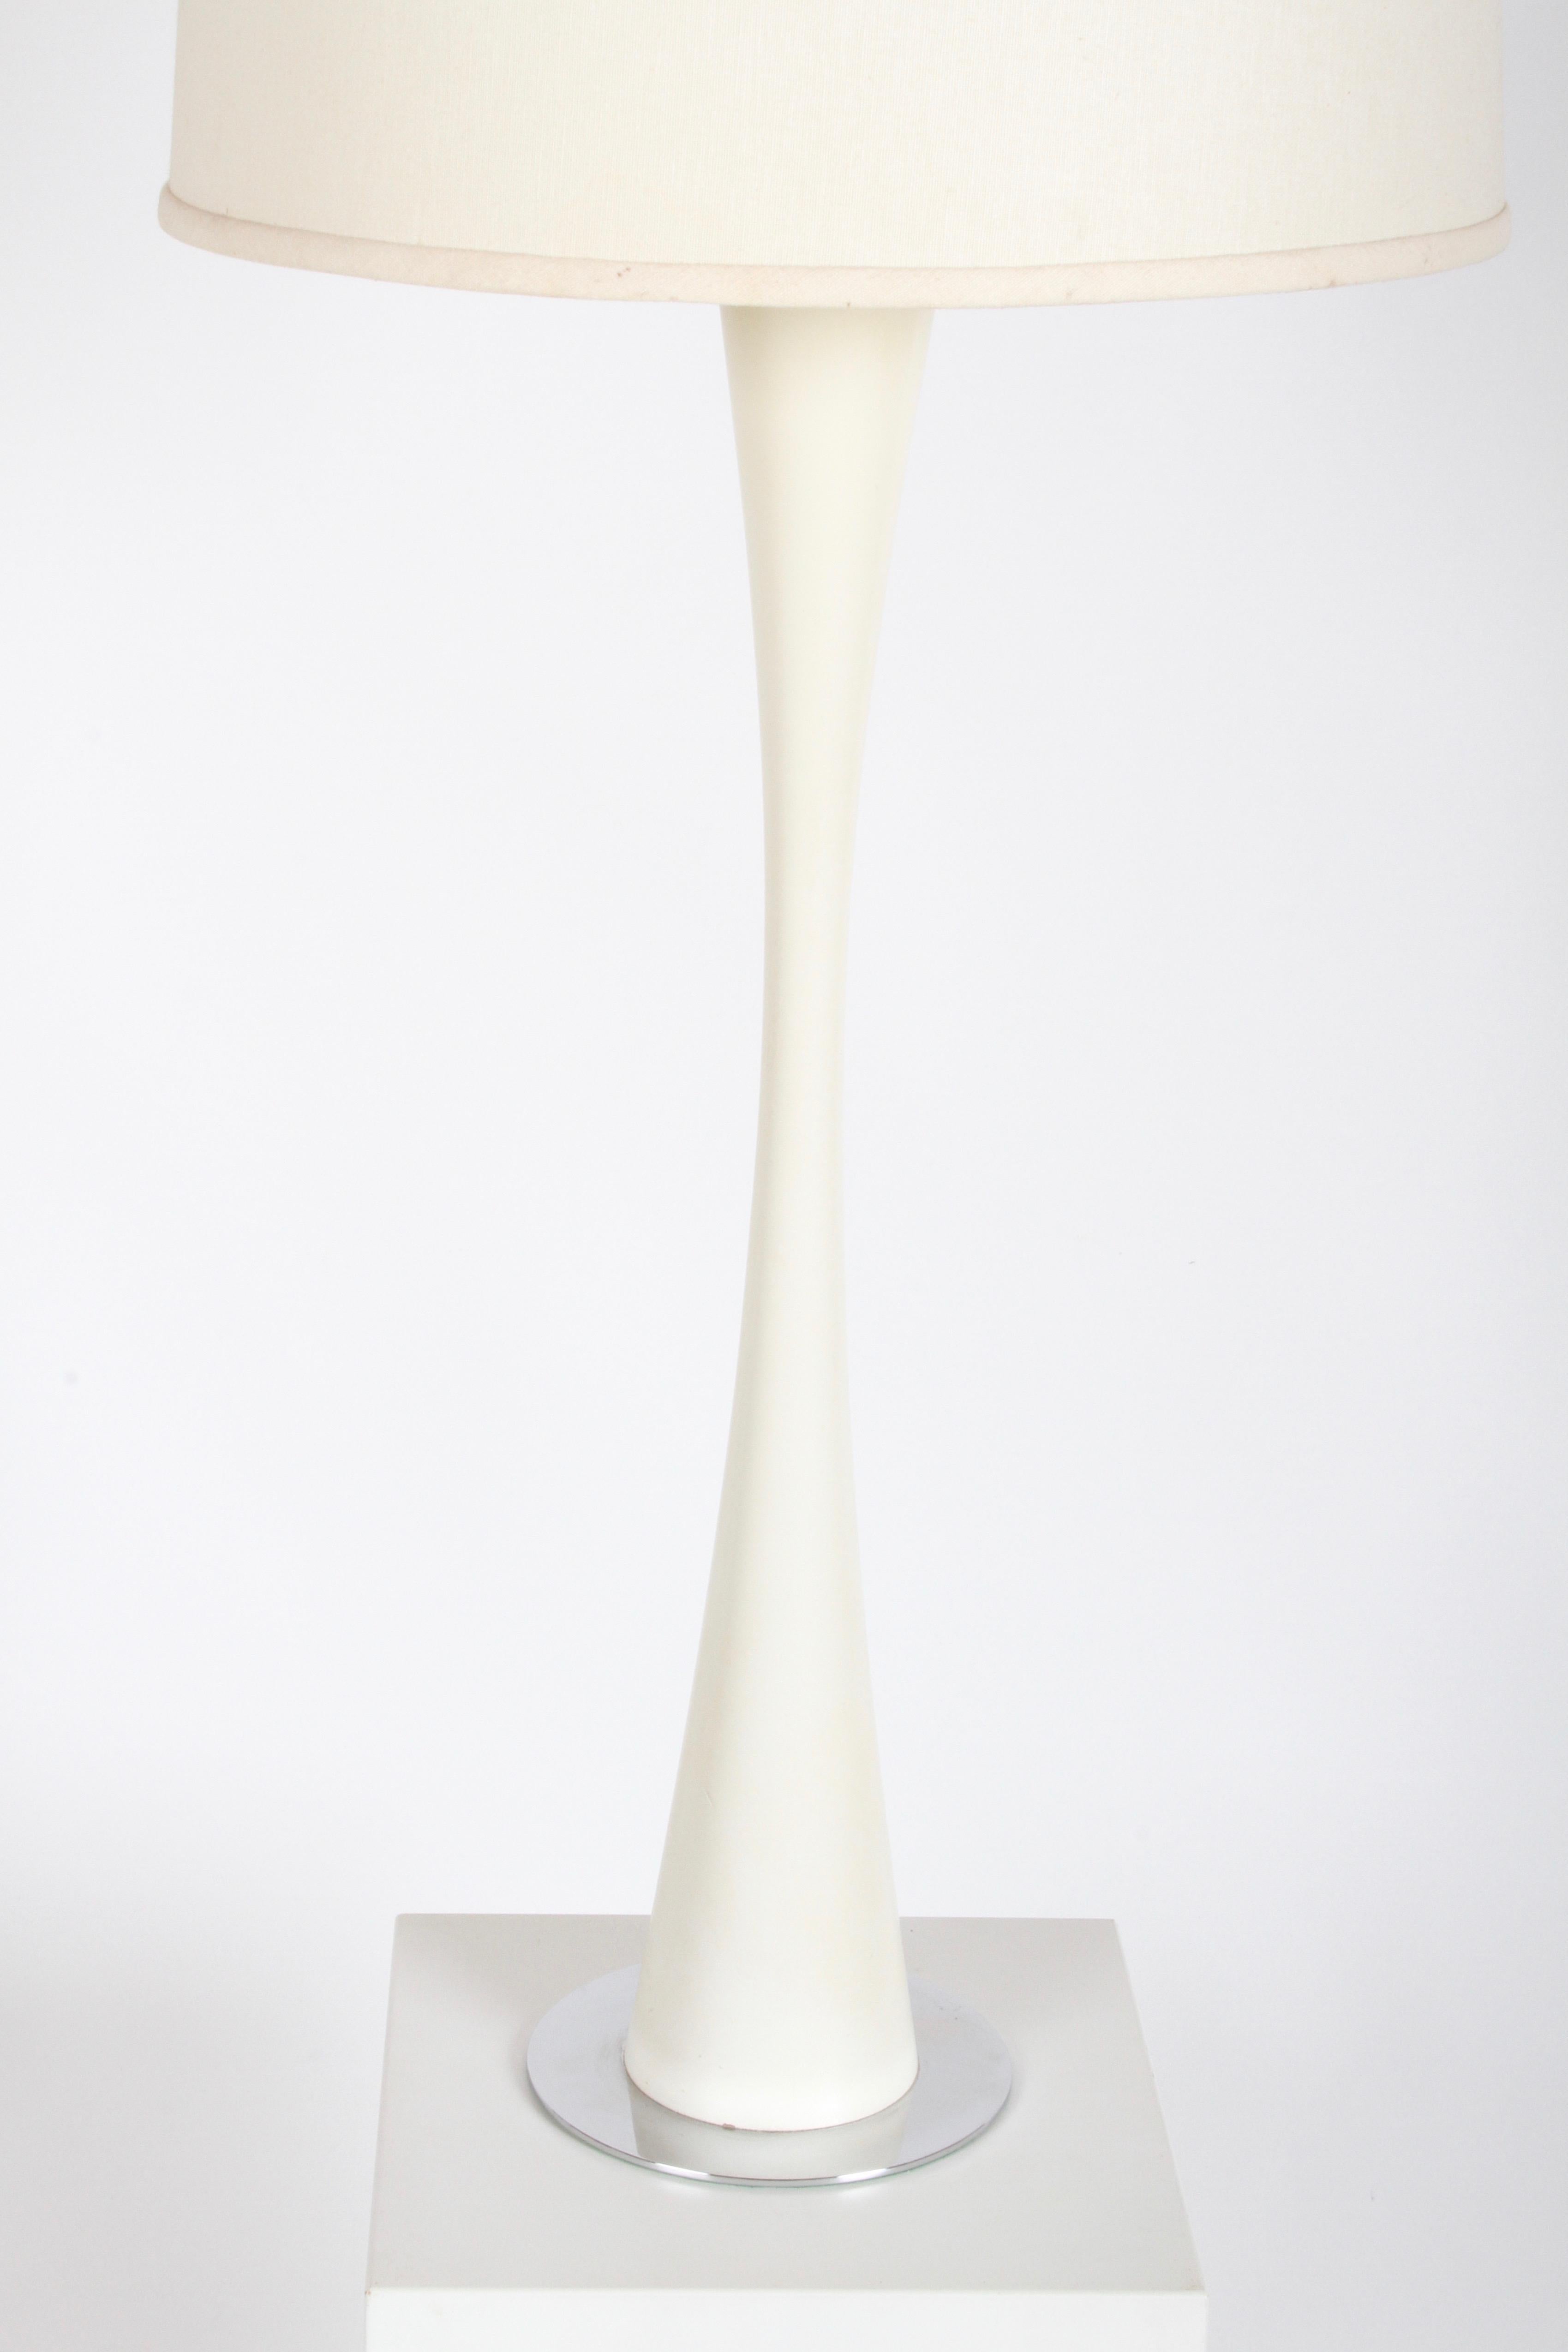 Mid-20th Century Tall Mid-Century Modern White Tulip Form Column Table Lamp with Chrome Base For Sale